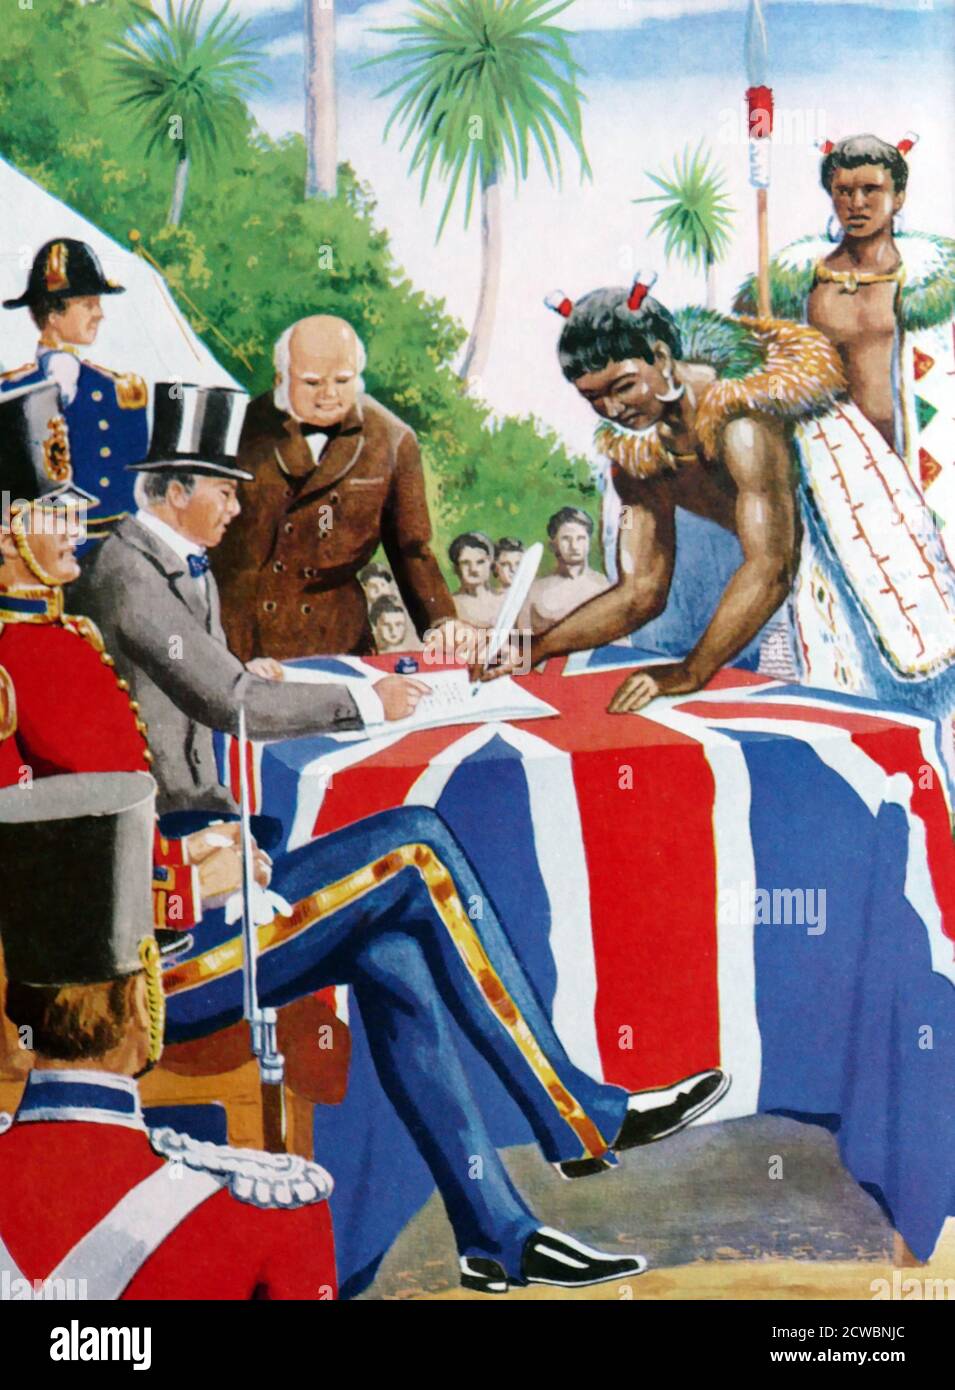 Illustration showing the signing of the Treaty of Waitangi on 6 February 1840 by representatives of the British Crown and Maori chiefs, from the North Island of New Zealand. It has become a document of central importance to the history, to the political constitution of the state, and to the national myths of New Zealand, and has played a major role in framing the political relations between New Zealand's government and the Maori population, especially from the late-20th century. Stock Photo